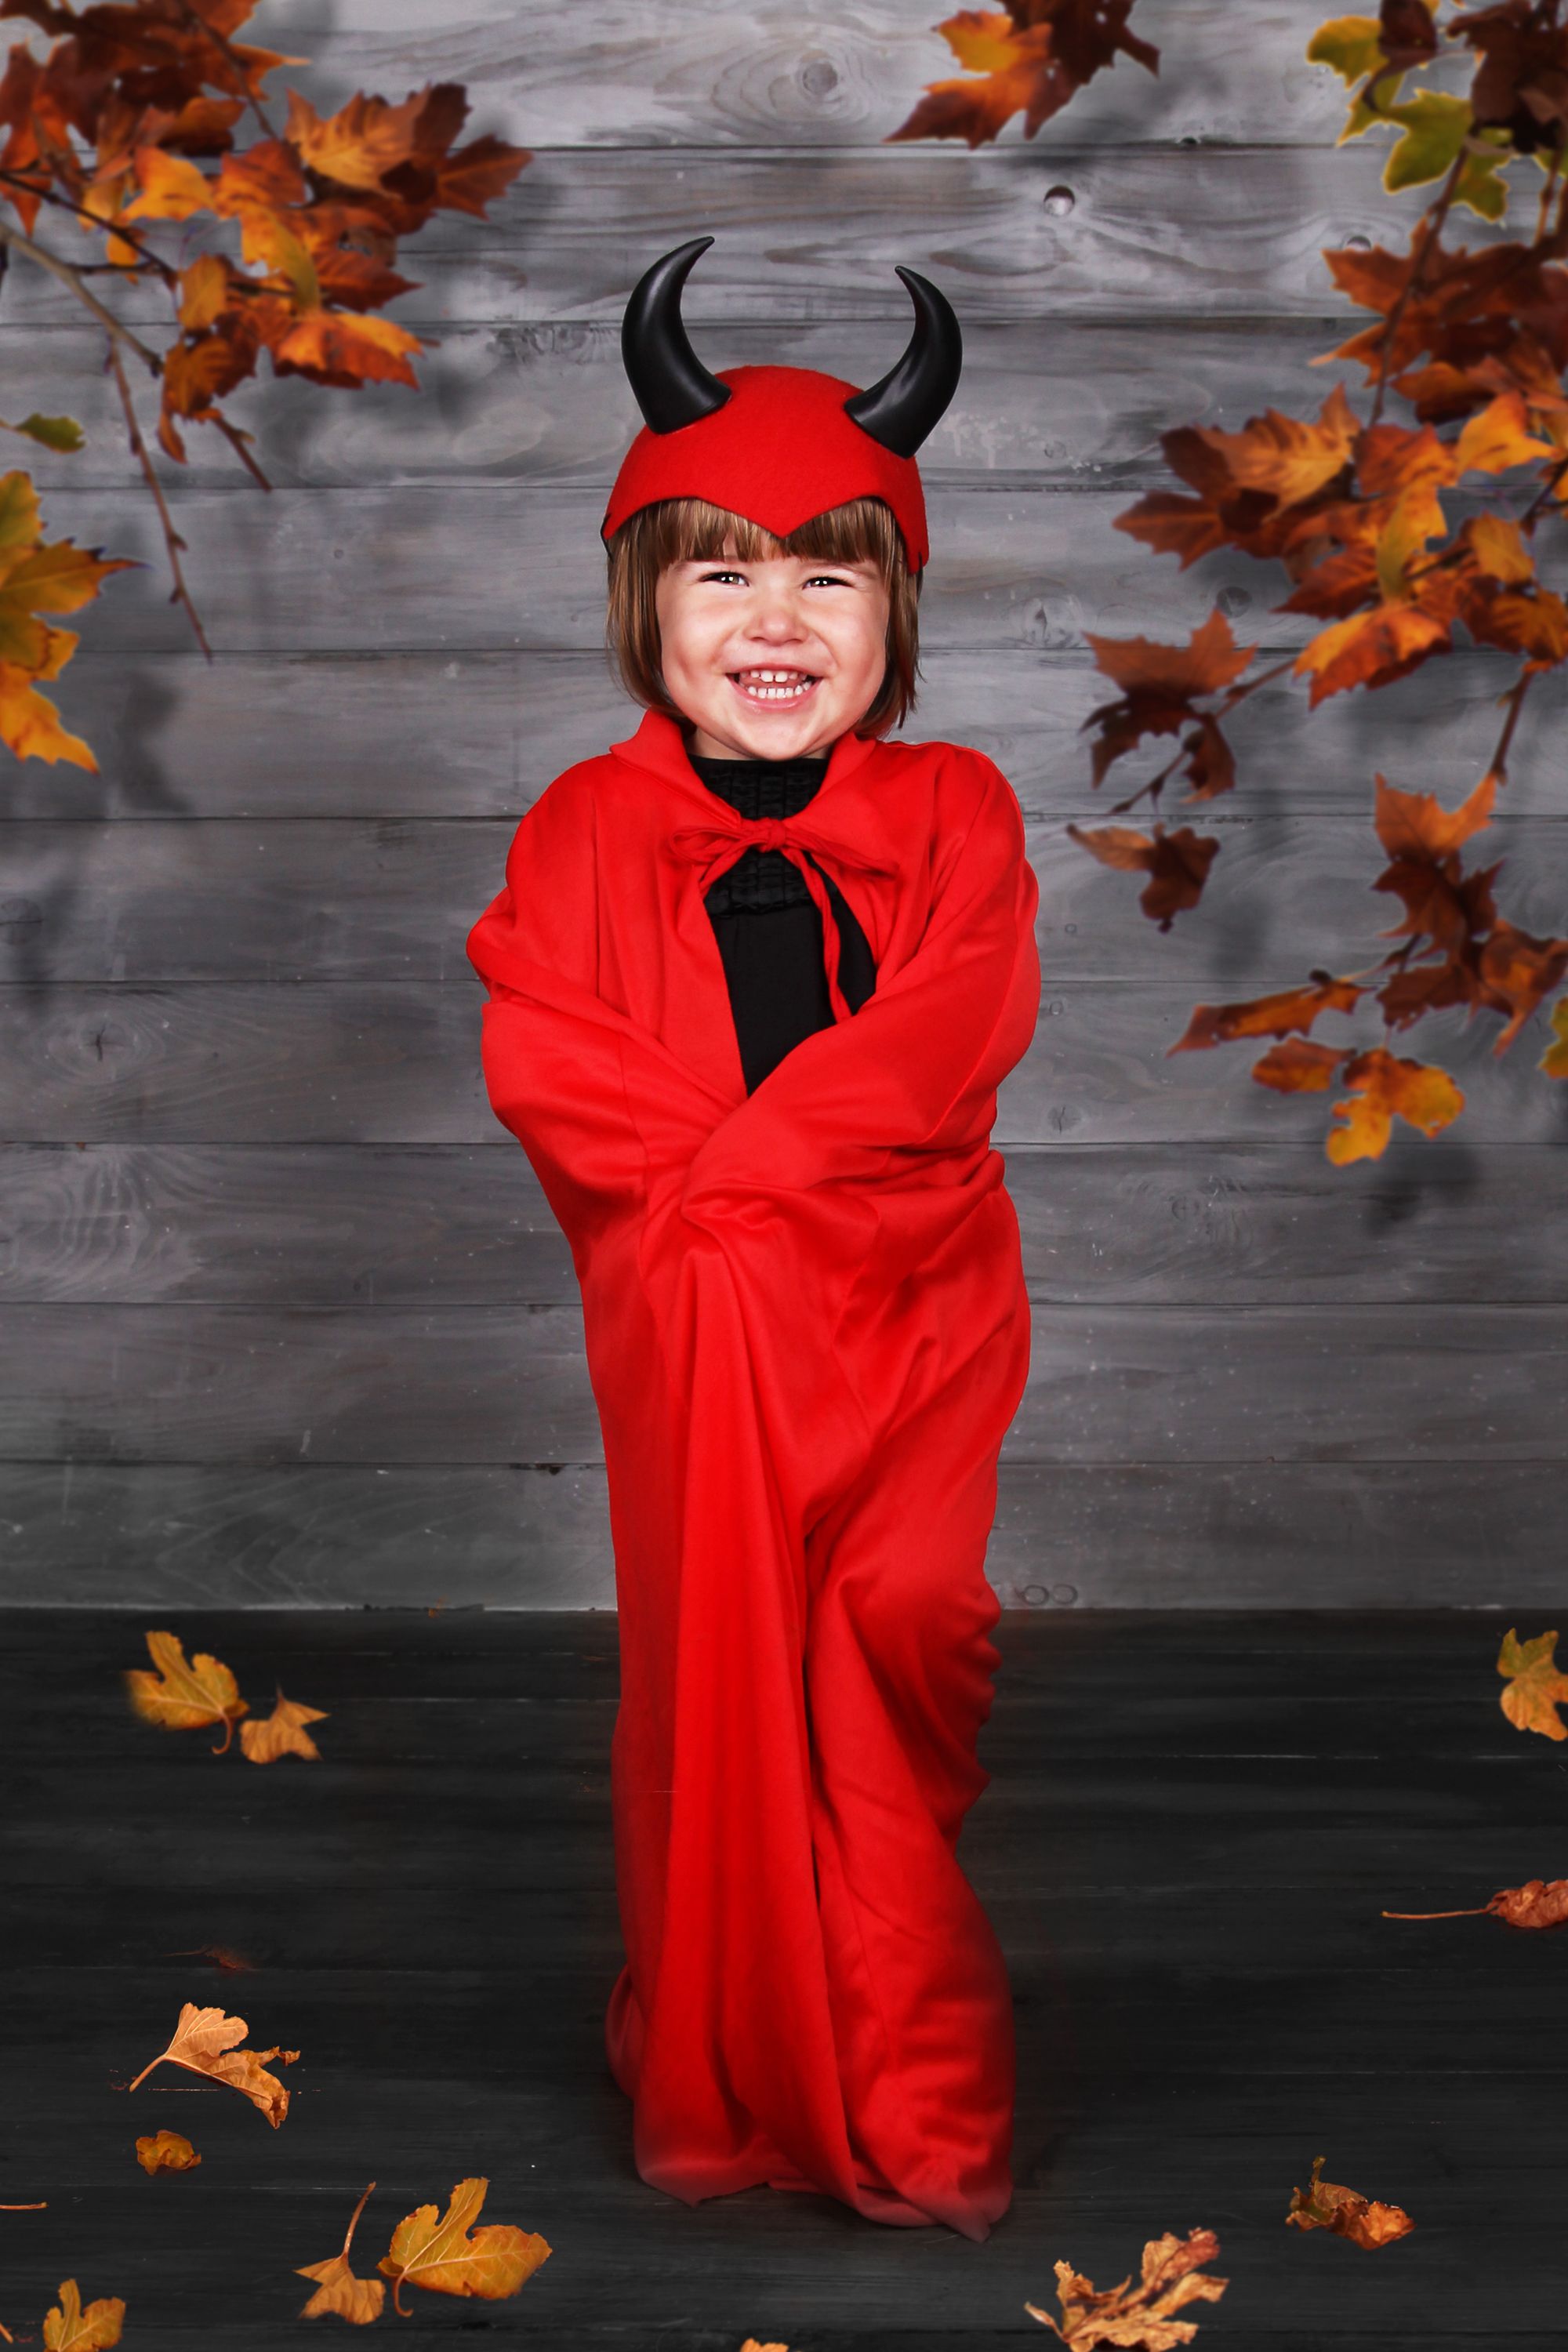 Devil Halloween Costume - How to Make a Child&#39;s Devil Halloween Costume